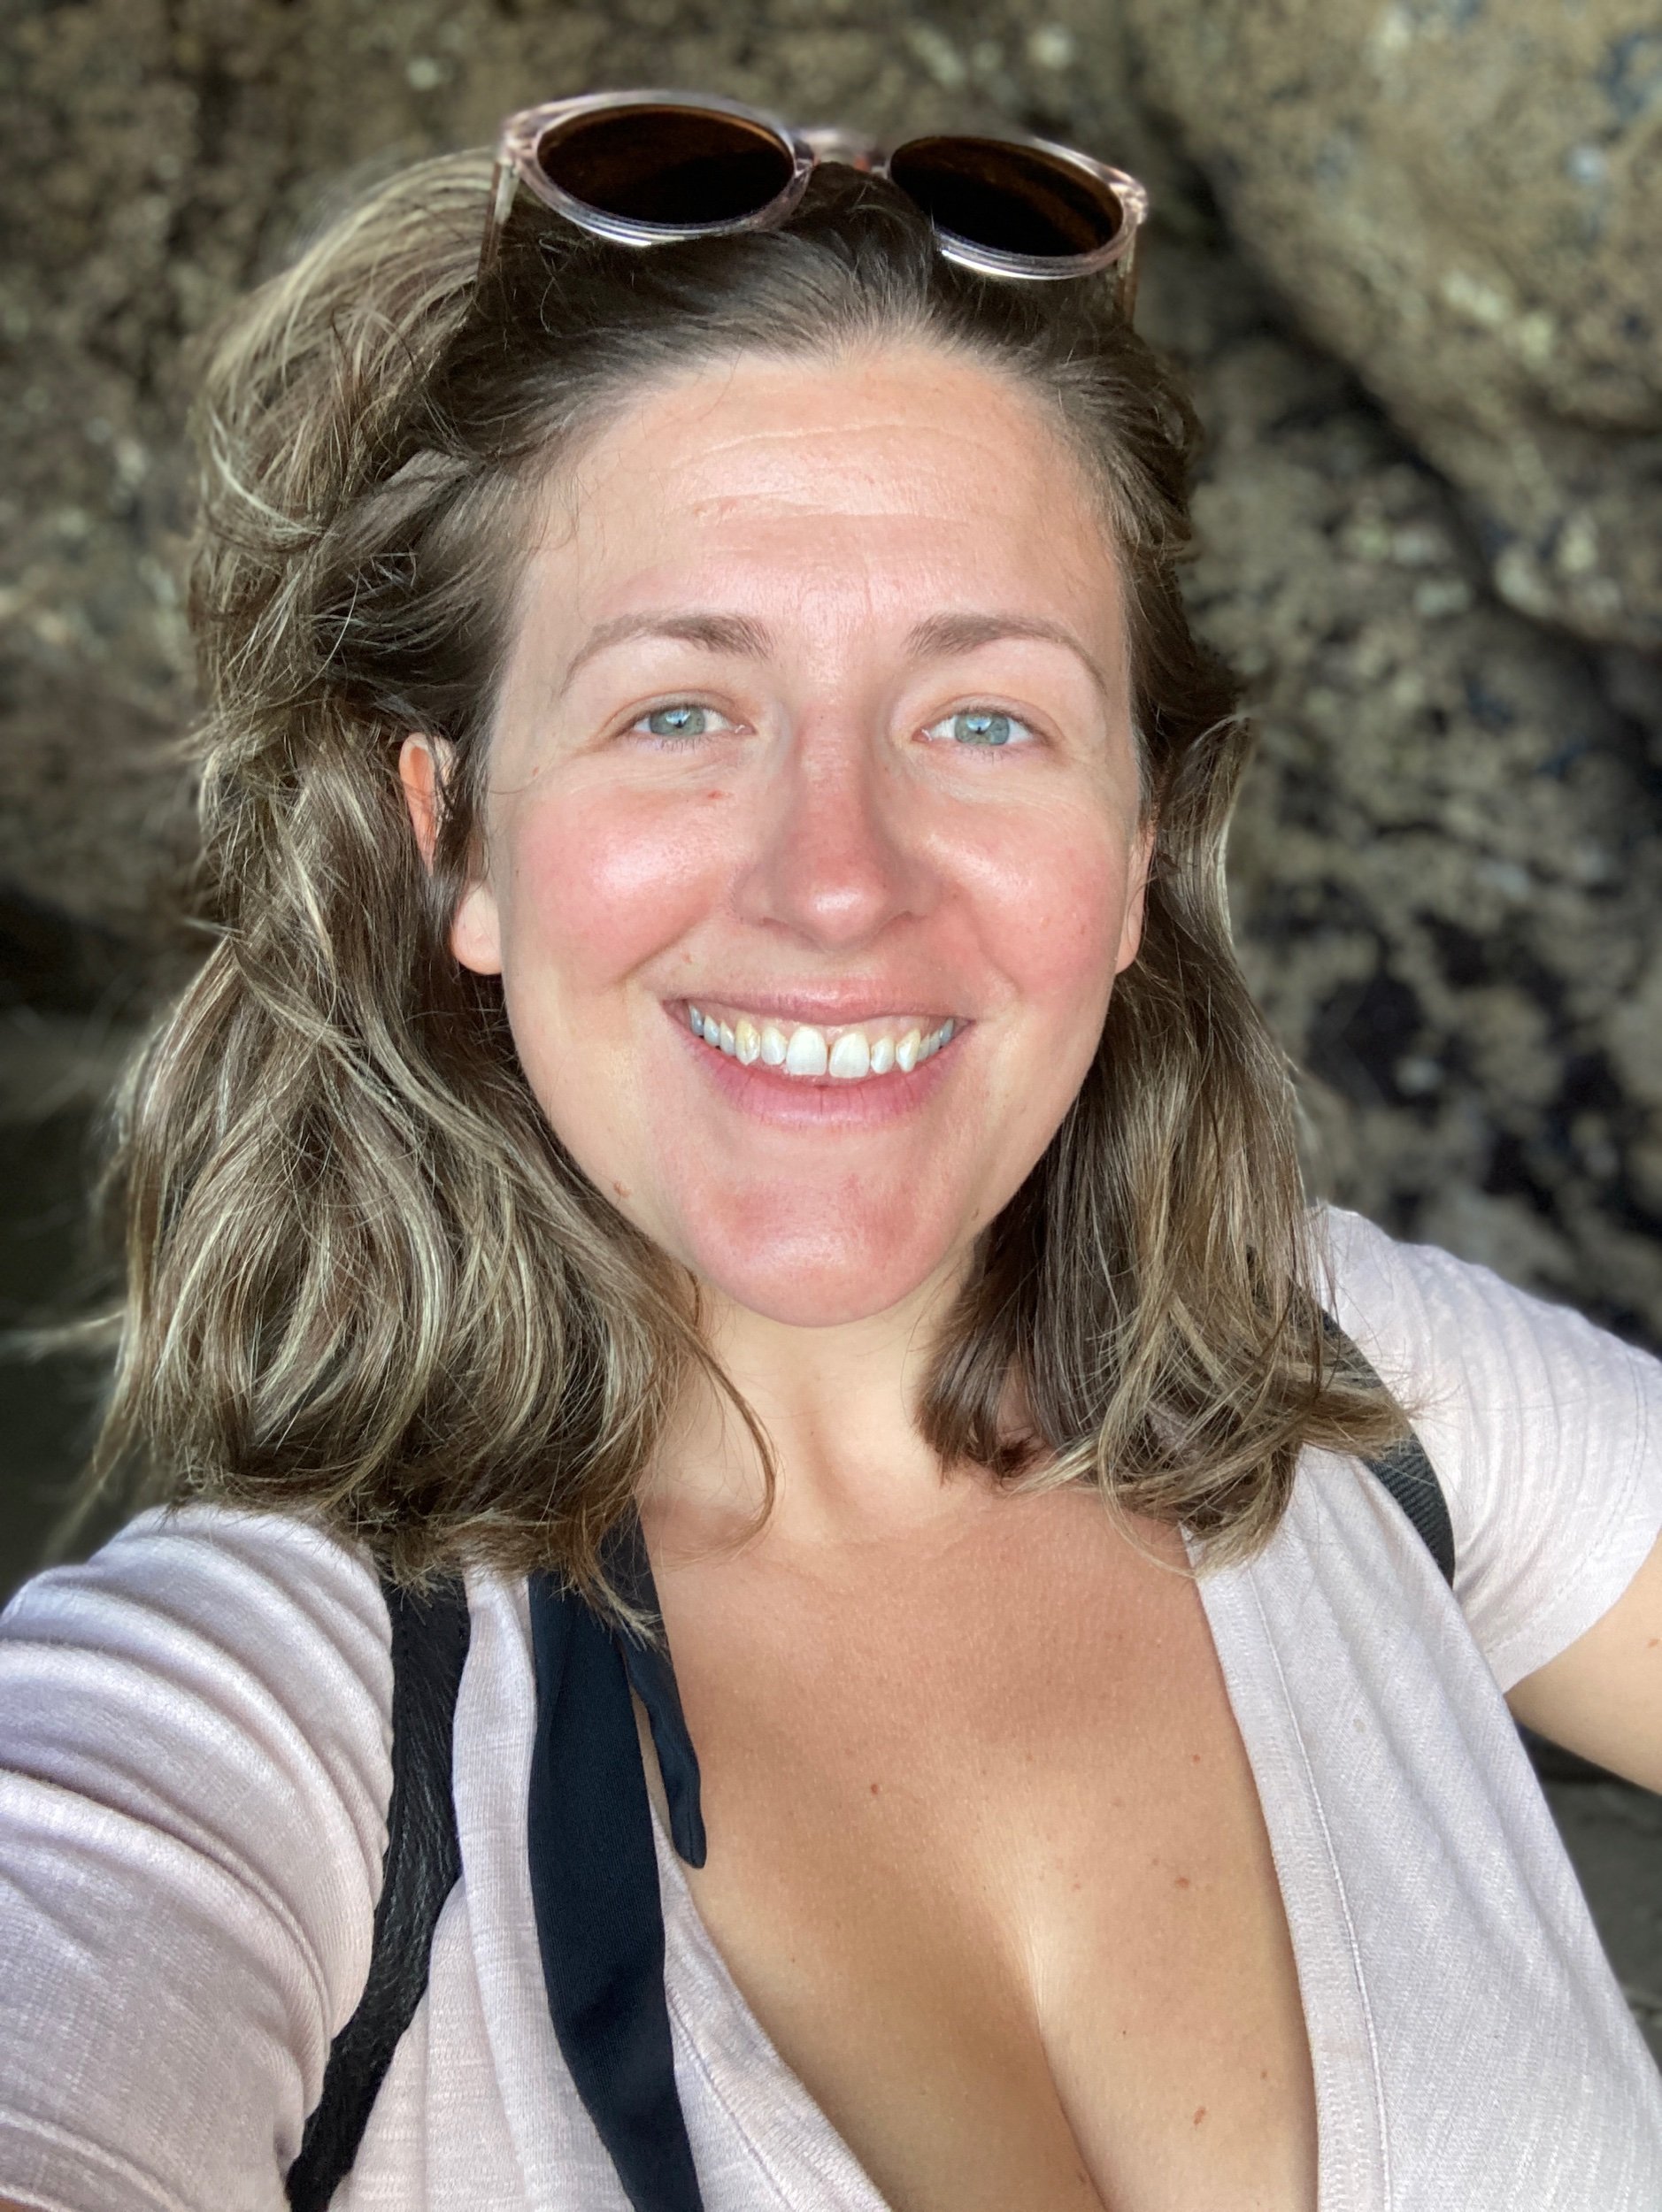 A portrait selfie picture of a woman. The image is quite close up and she looks relaxed and happy. She is smiling, she appears to be wearing summer cloths, her hair is shoulder length, natural and is held back by sunglasses which she wears on top of her head. There is a cave in the background and it looks as if she has been swimming in the sea.